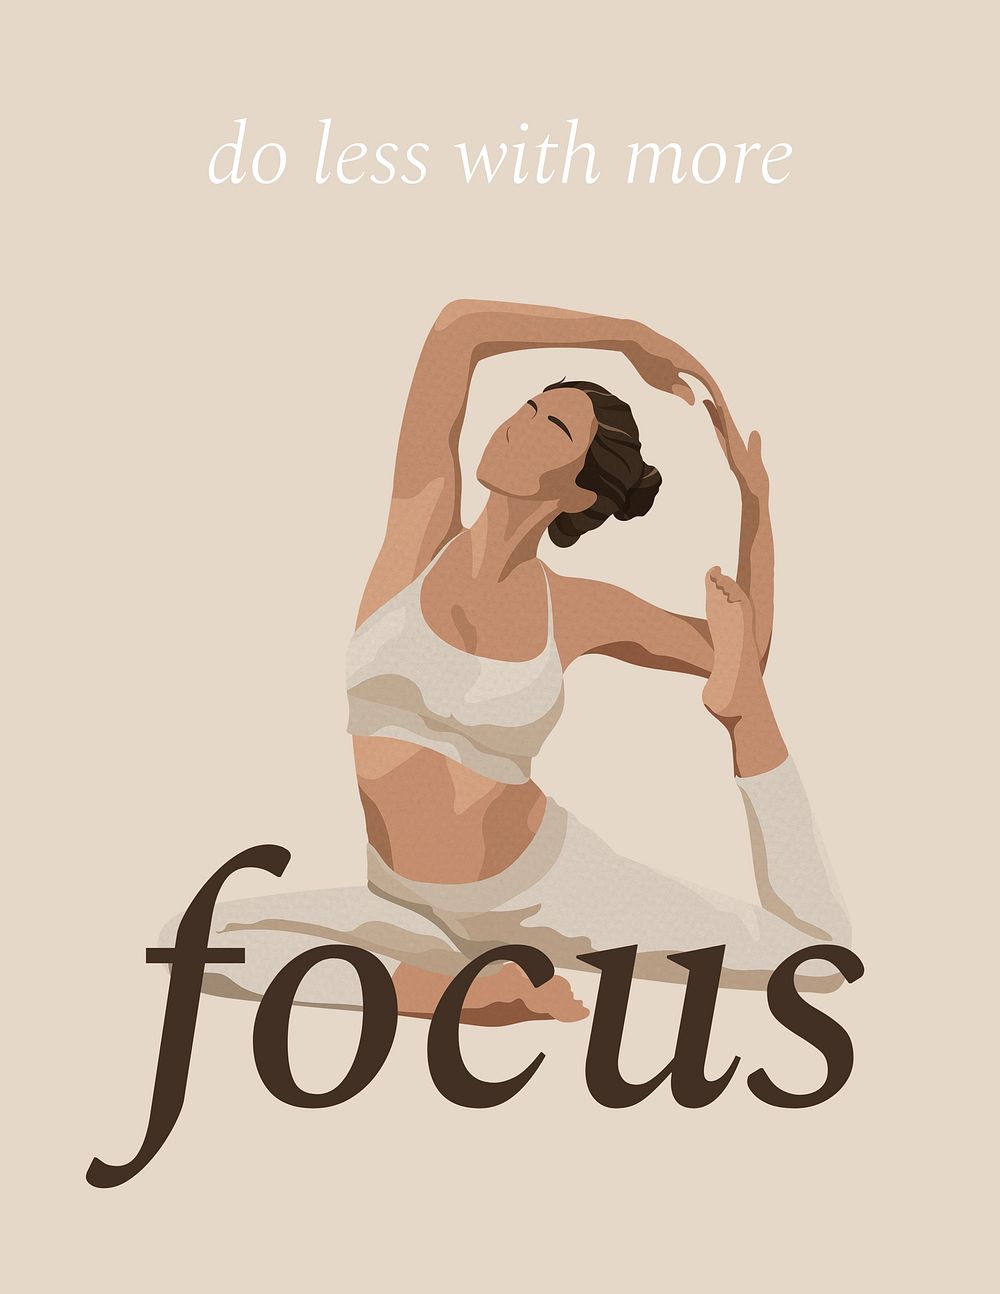 Yoga aesthetic poster template